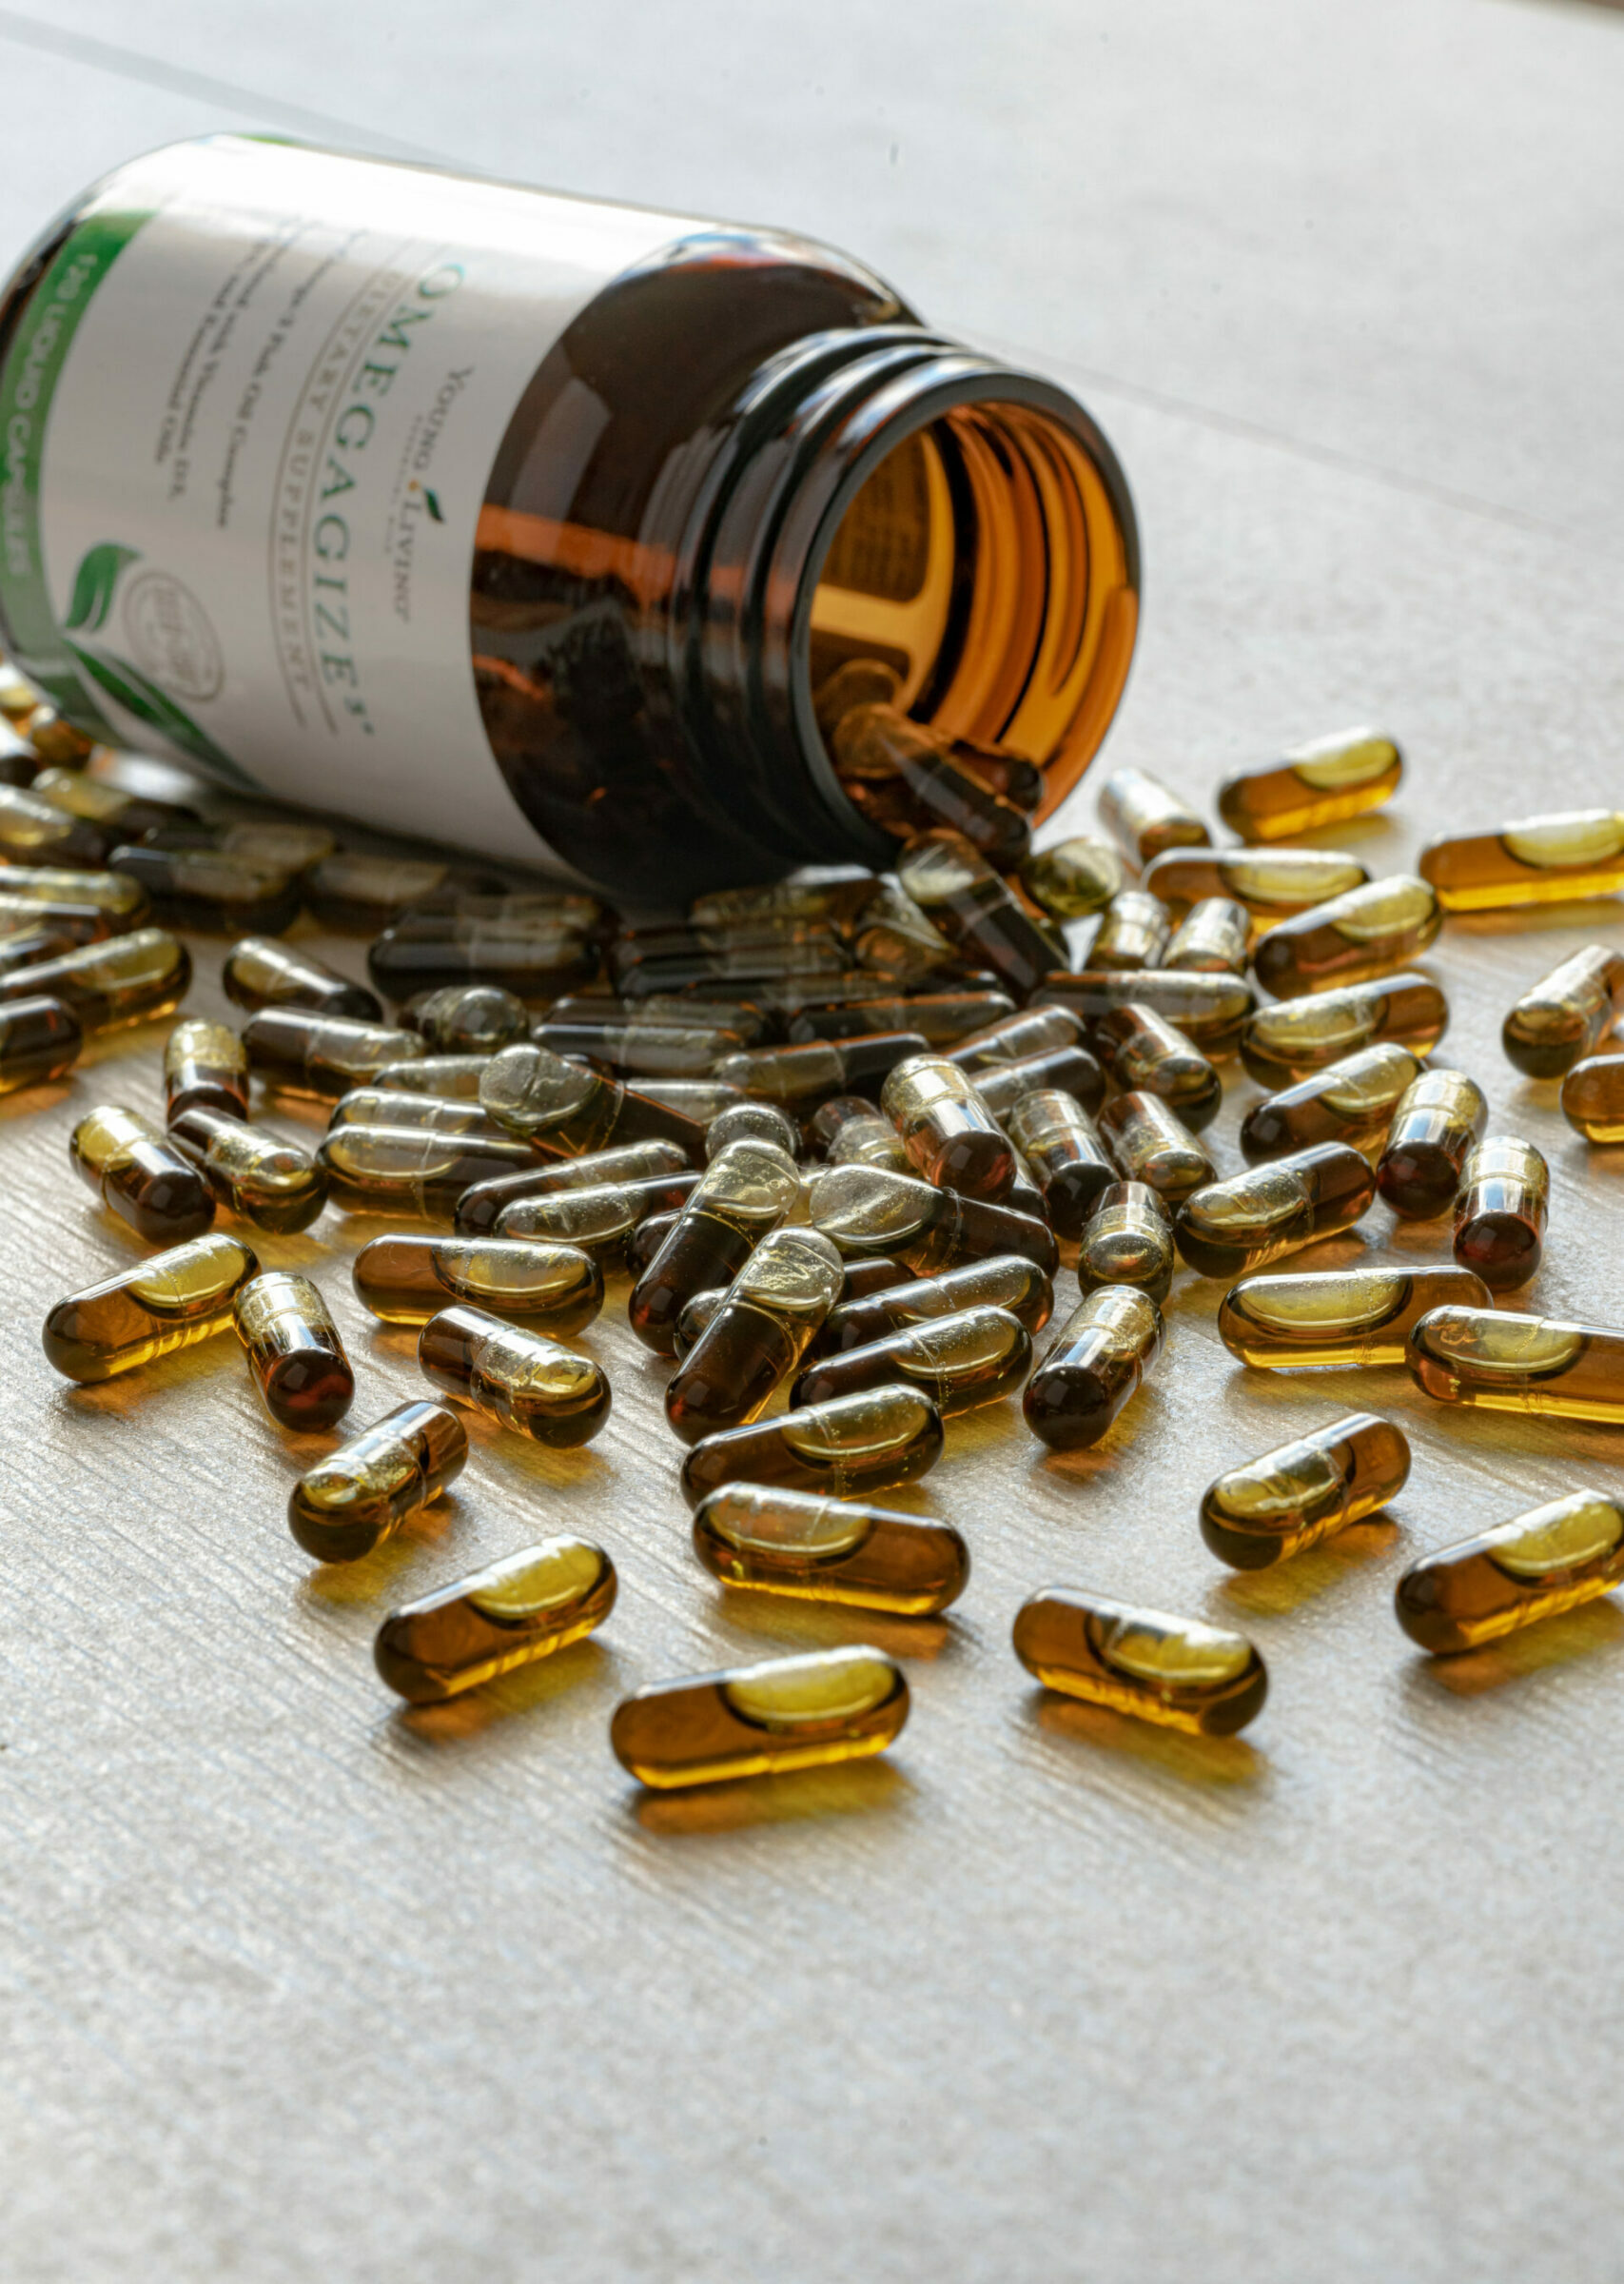 OmegaGize pills spilled out on surface next to bottle - Young Living Lavender Life Blog 